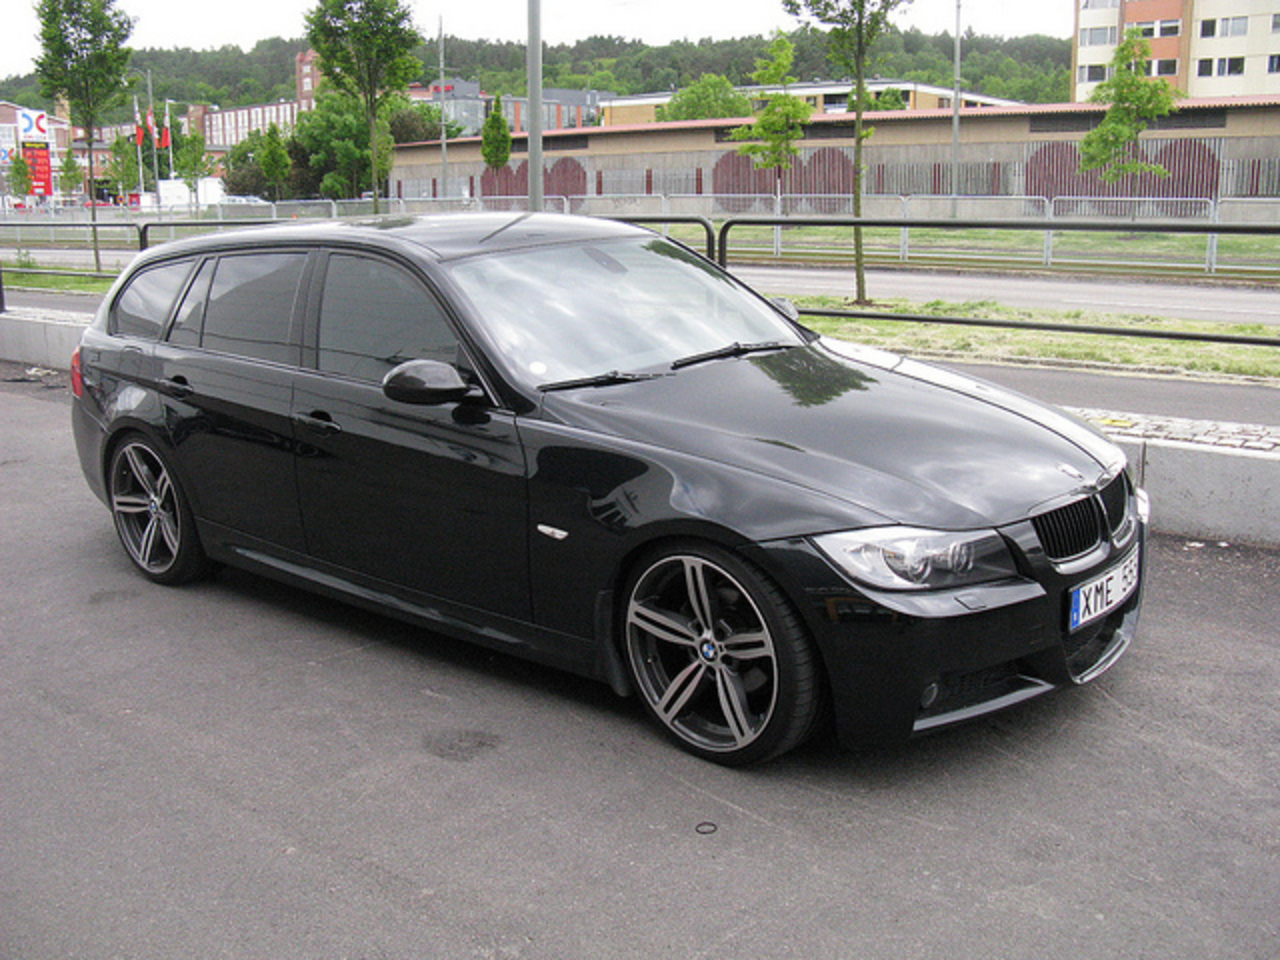 BMW 325i Touring M Sport E91 | Flickr - Photo Sharing!